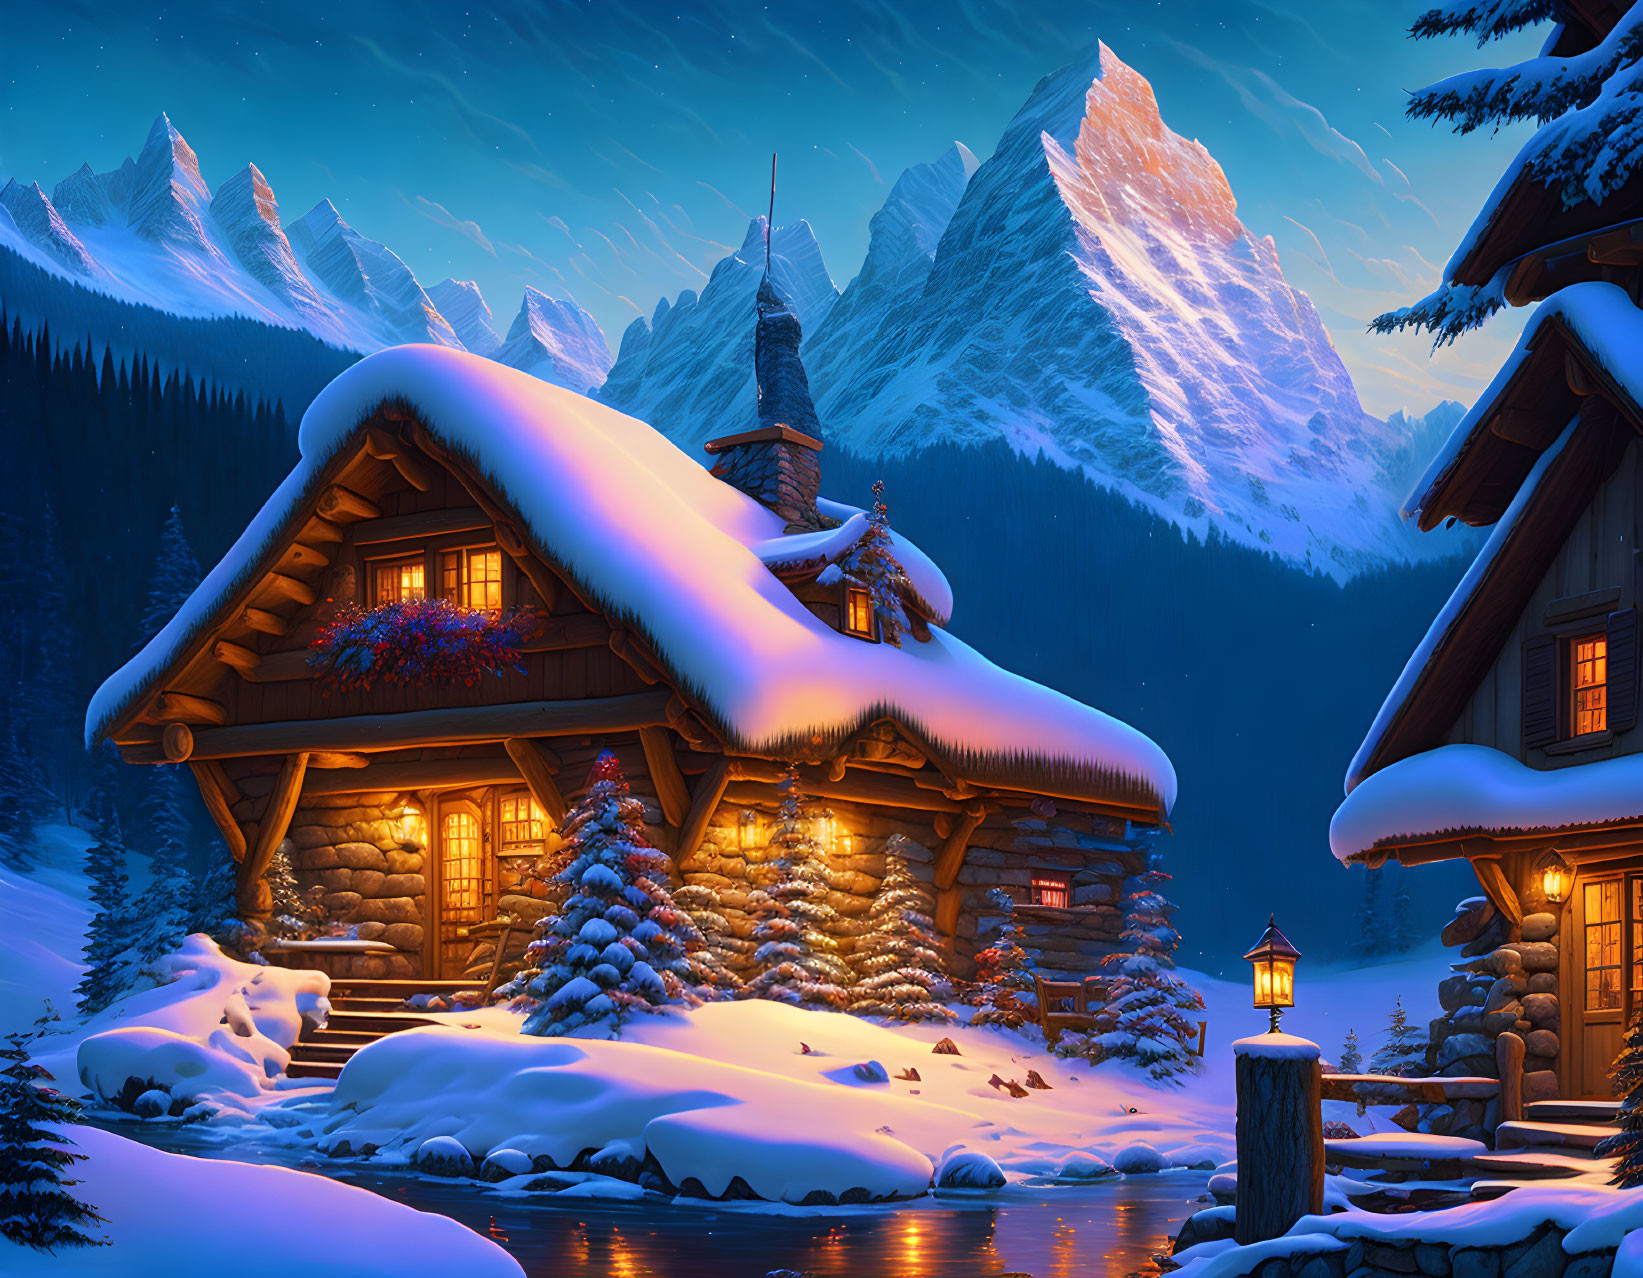 Snow-covered log cabin in tranquil winter landscape with illuminated roof.